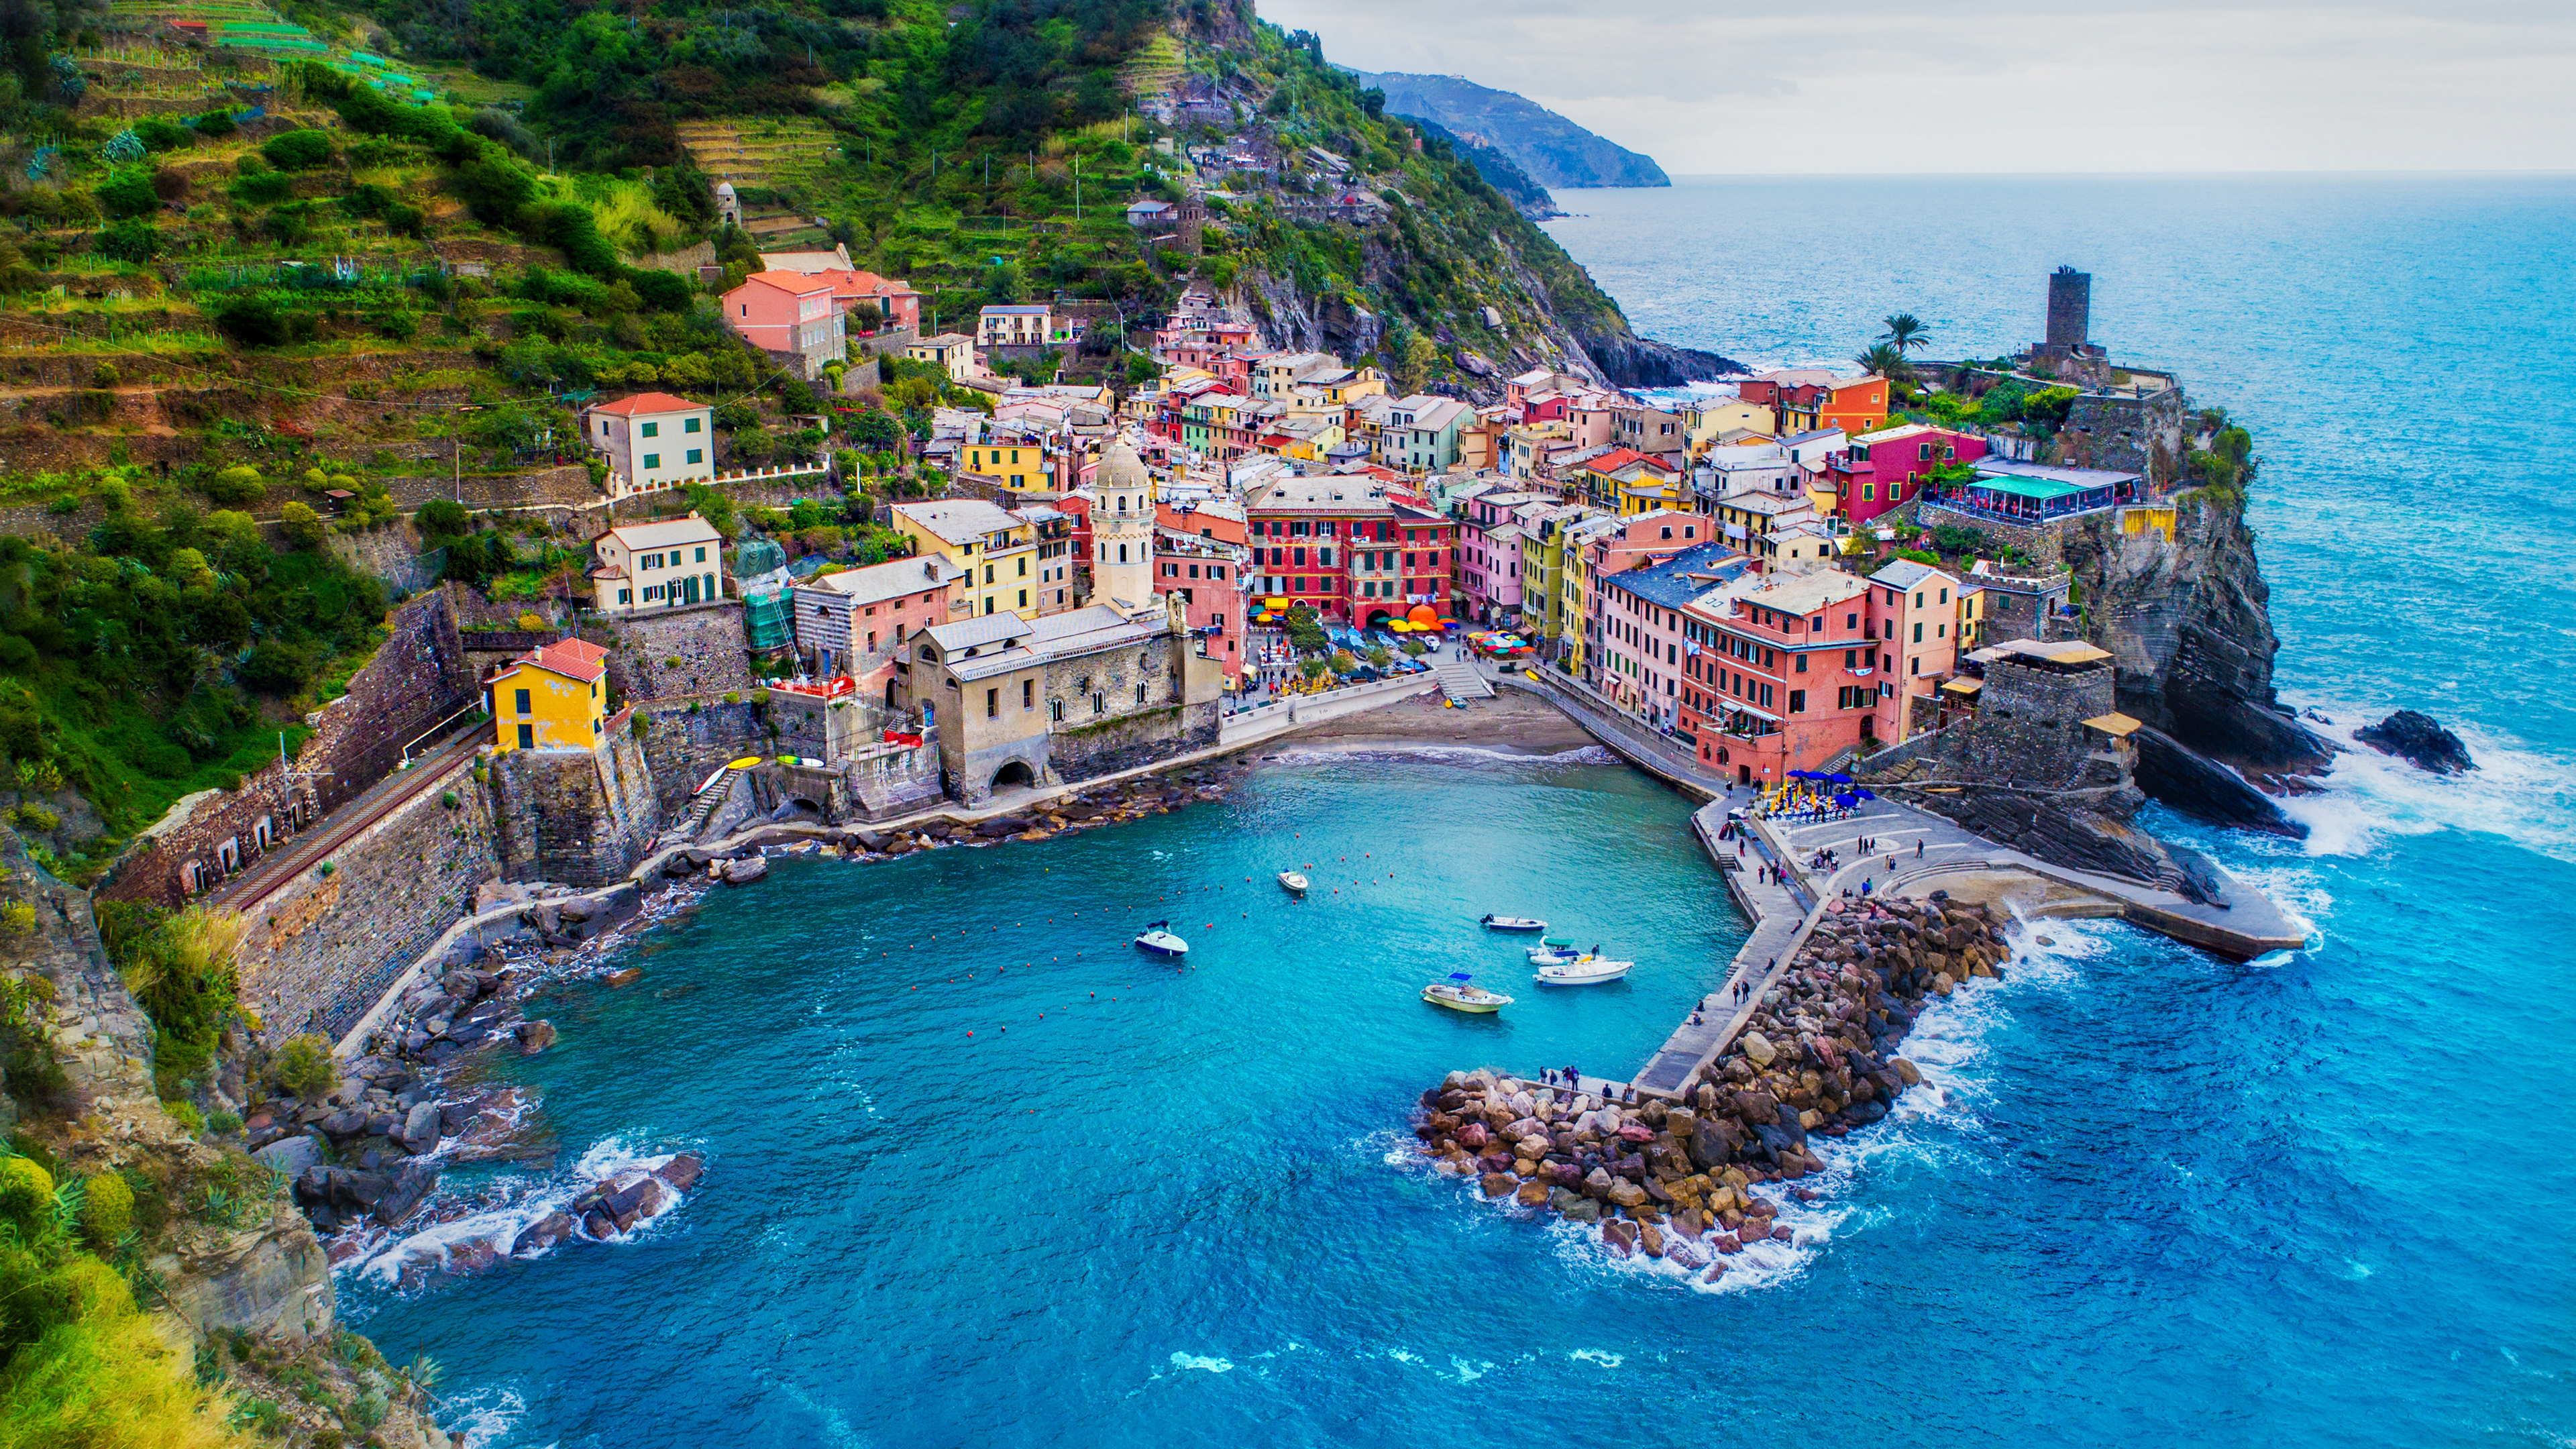 General 3840x2160 Trey Ratcliff photography Vernazza water village sea boat Cinque Terre Italy aerial view Liguria